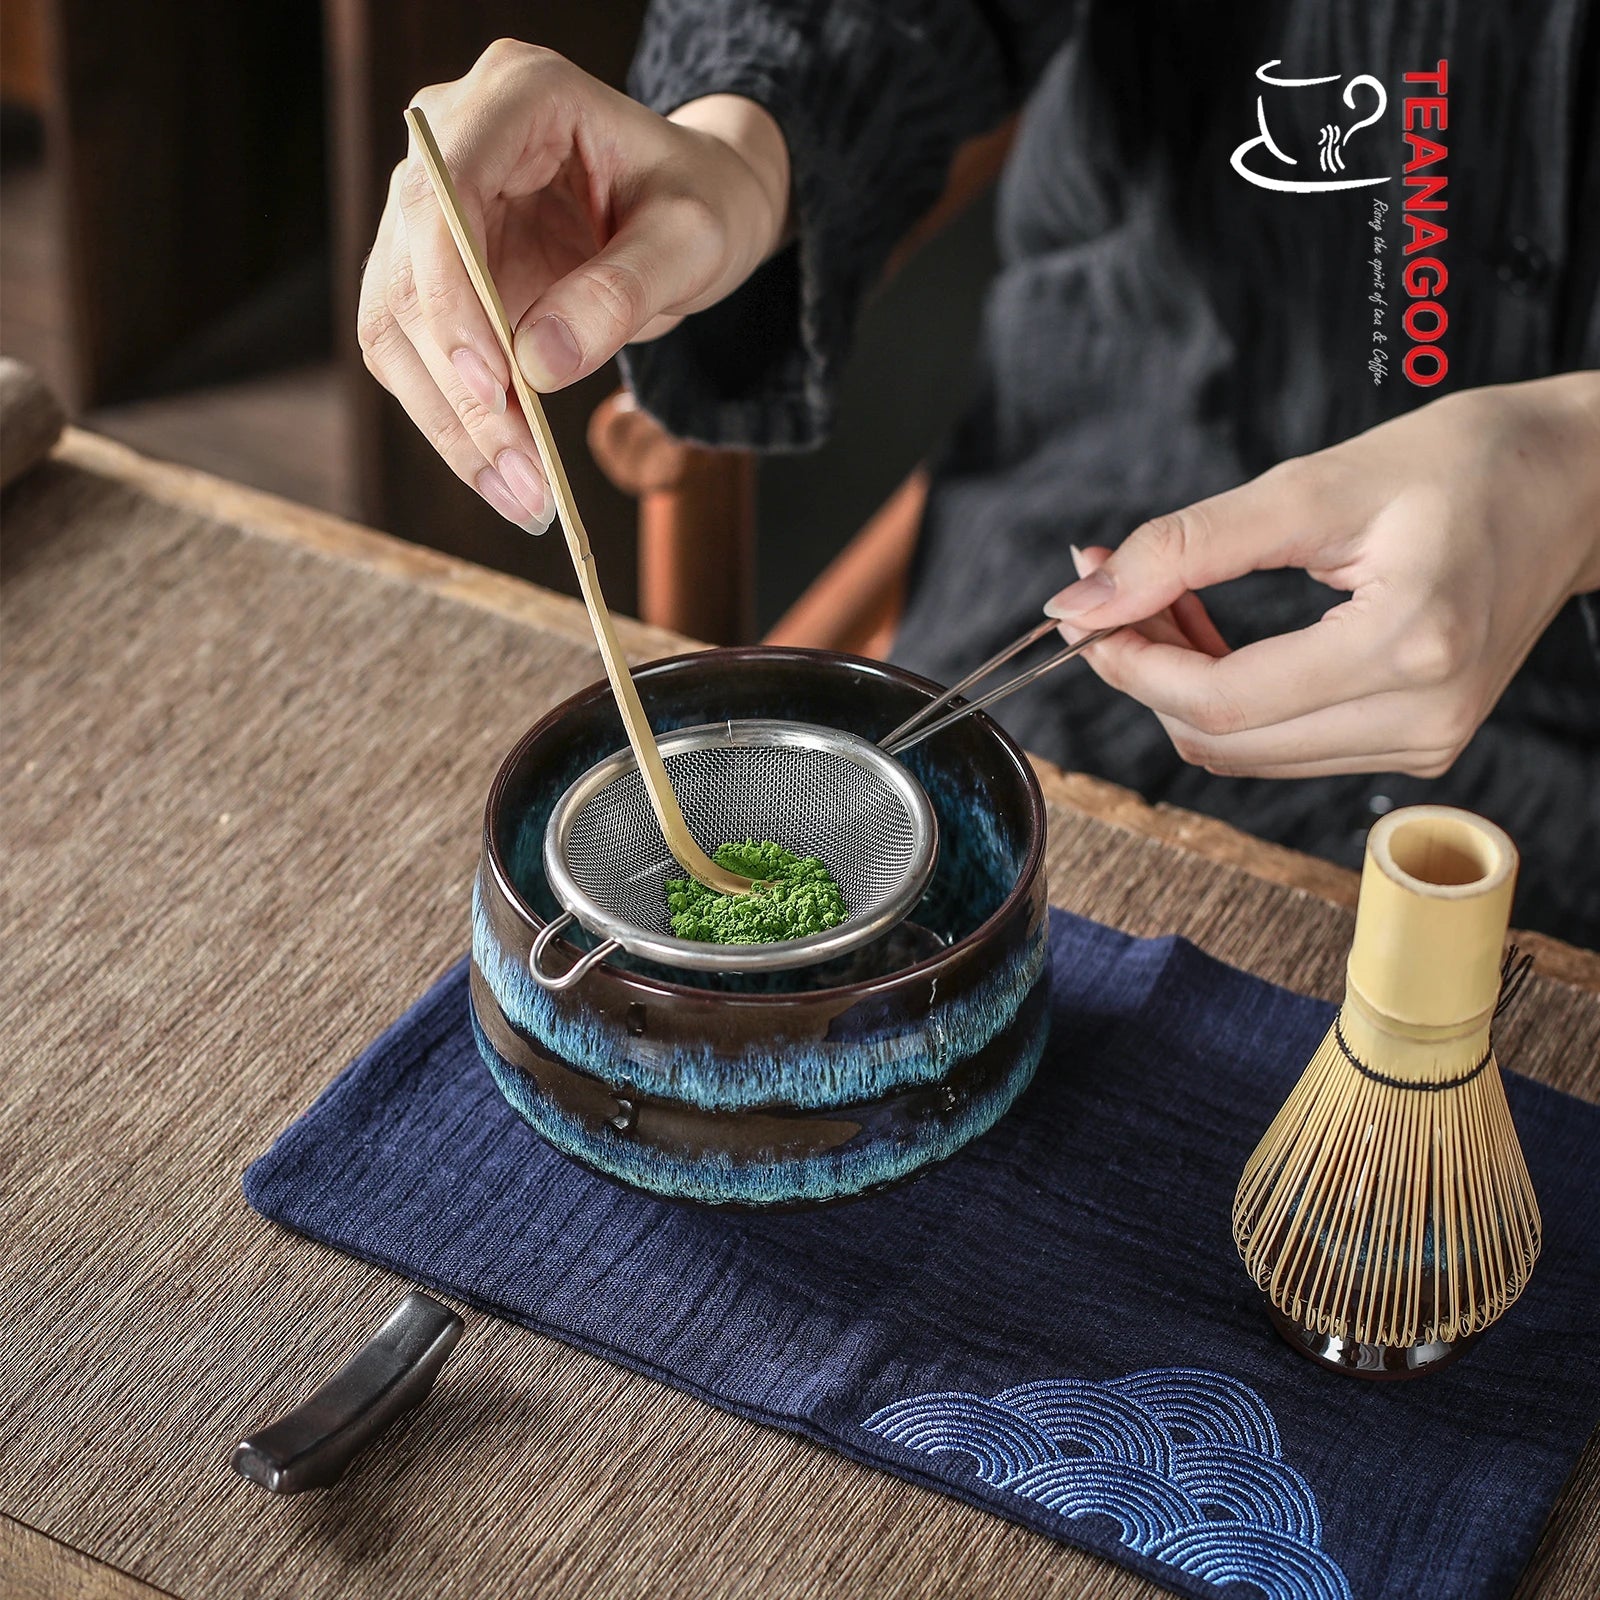 Artcome Japanese Matcha Tea Set, Matcha Bowl with Pouring Spout, Tea Tray,  Bamboo Whisk, Ceramic Whisk Holder, Handmade Matcha Ceremony Kit For